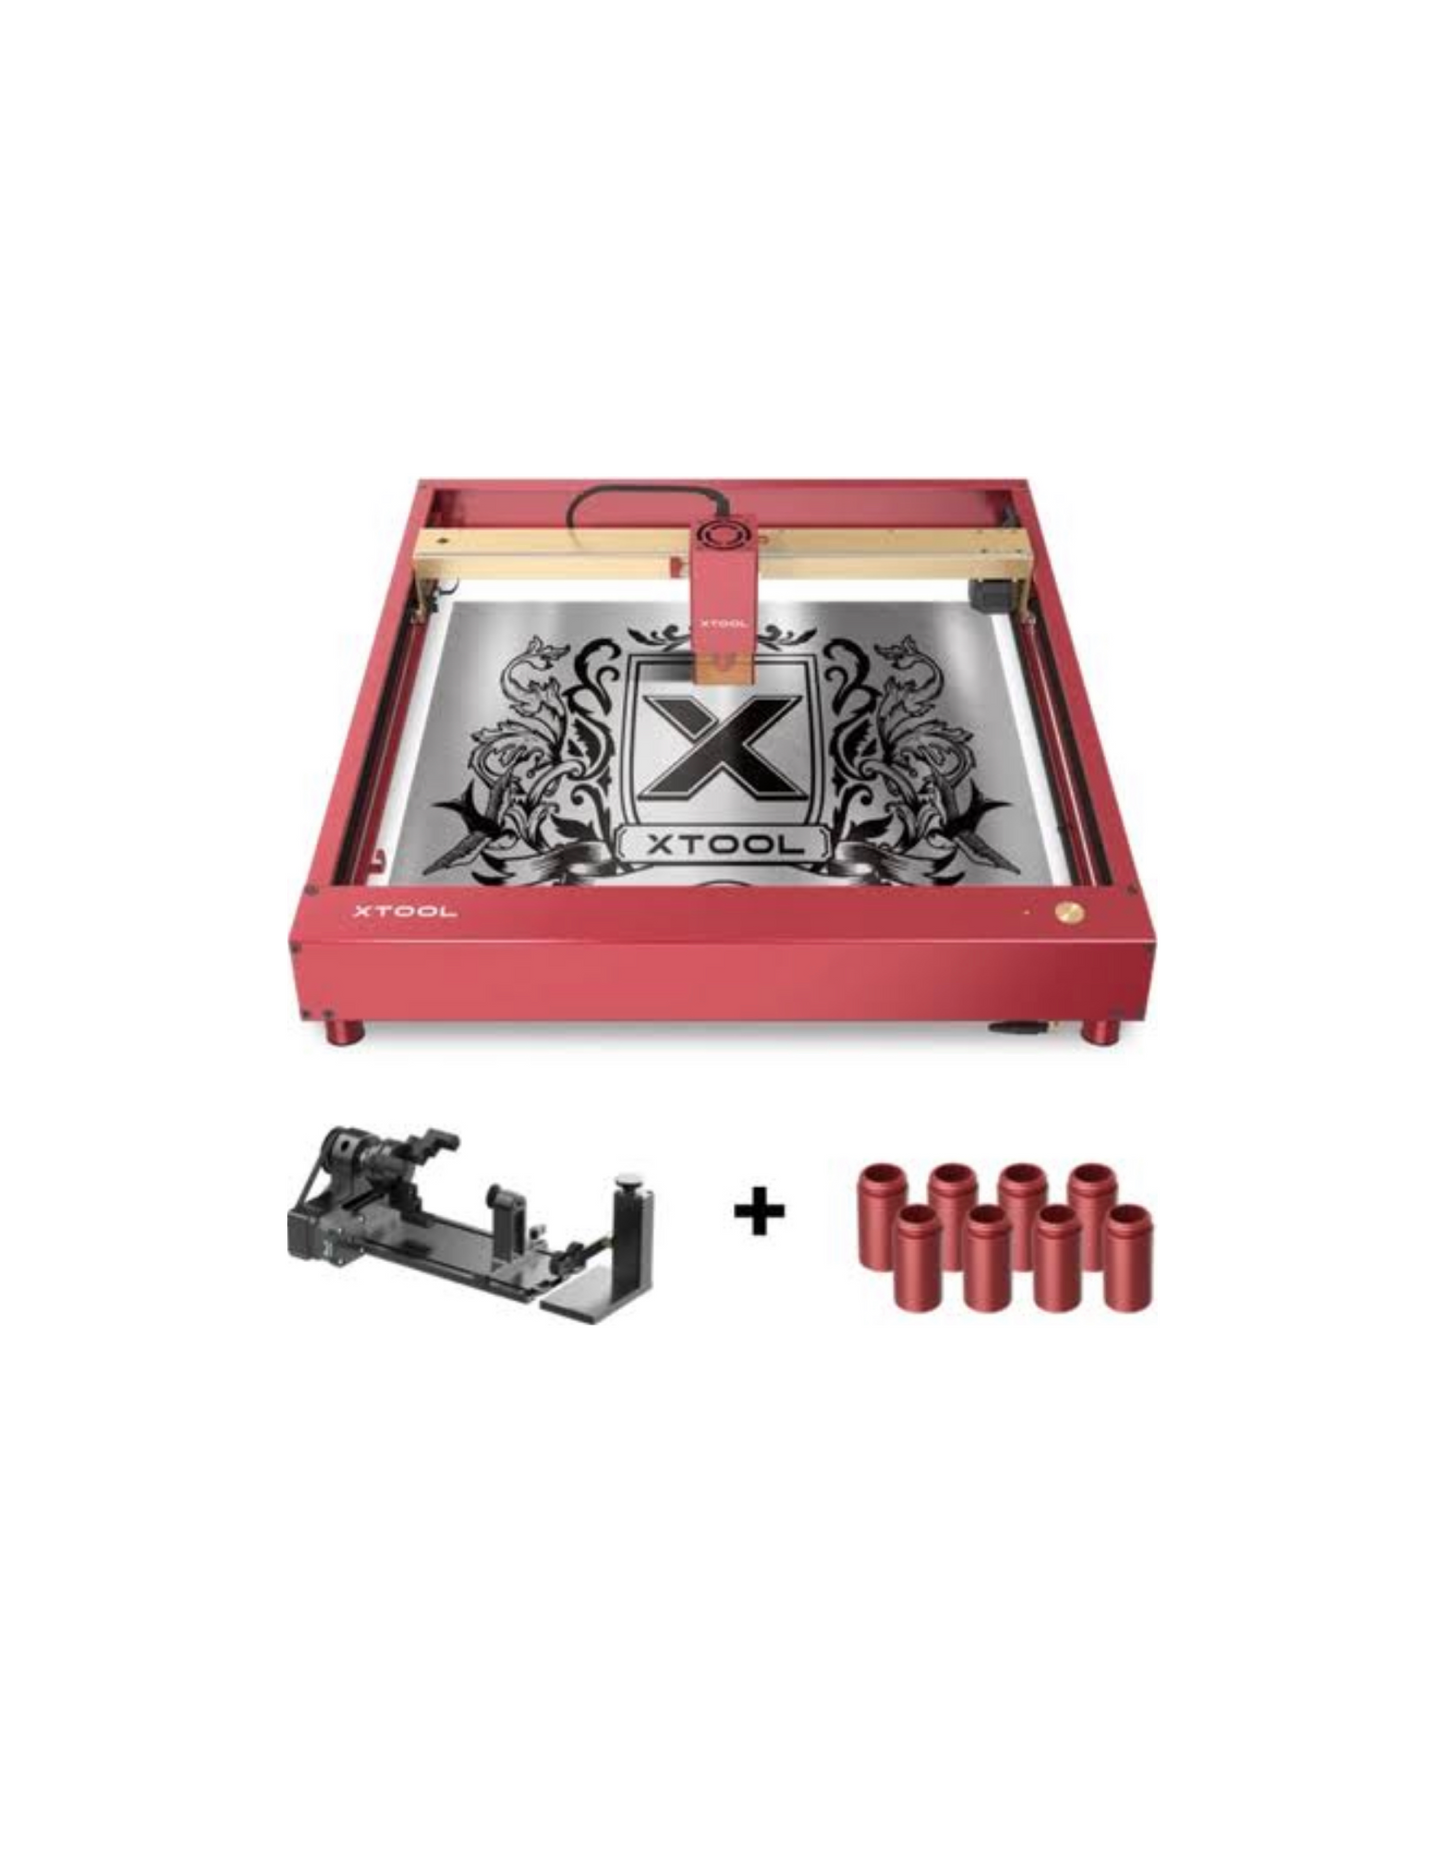 XTool D1 Pro Laser Engraver 20W Red For XTool D1 PRO Engraver